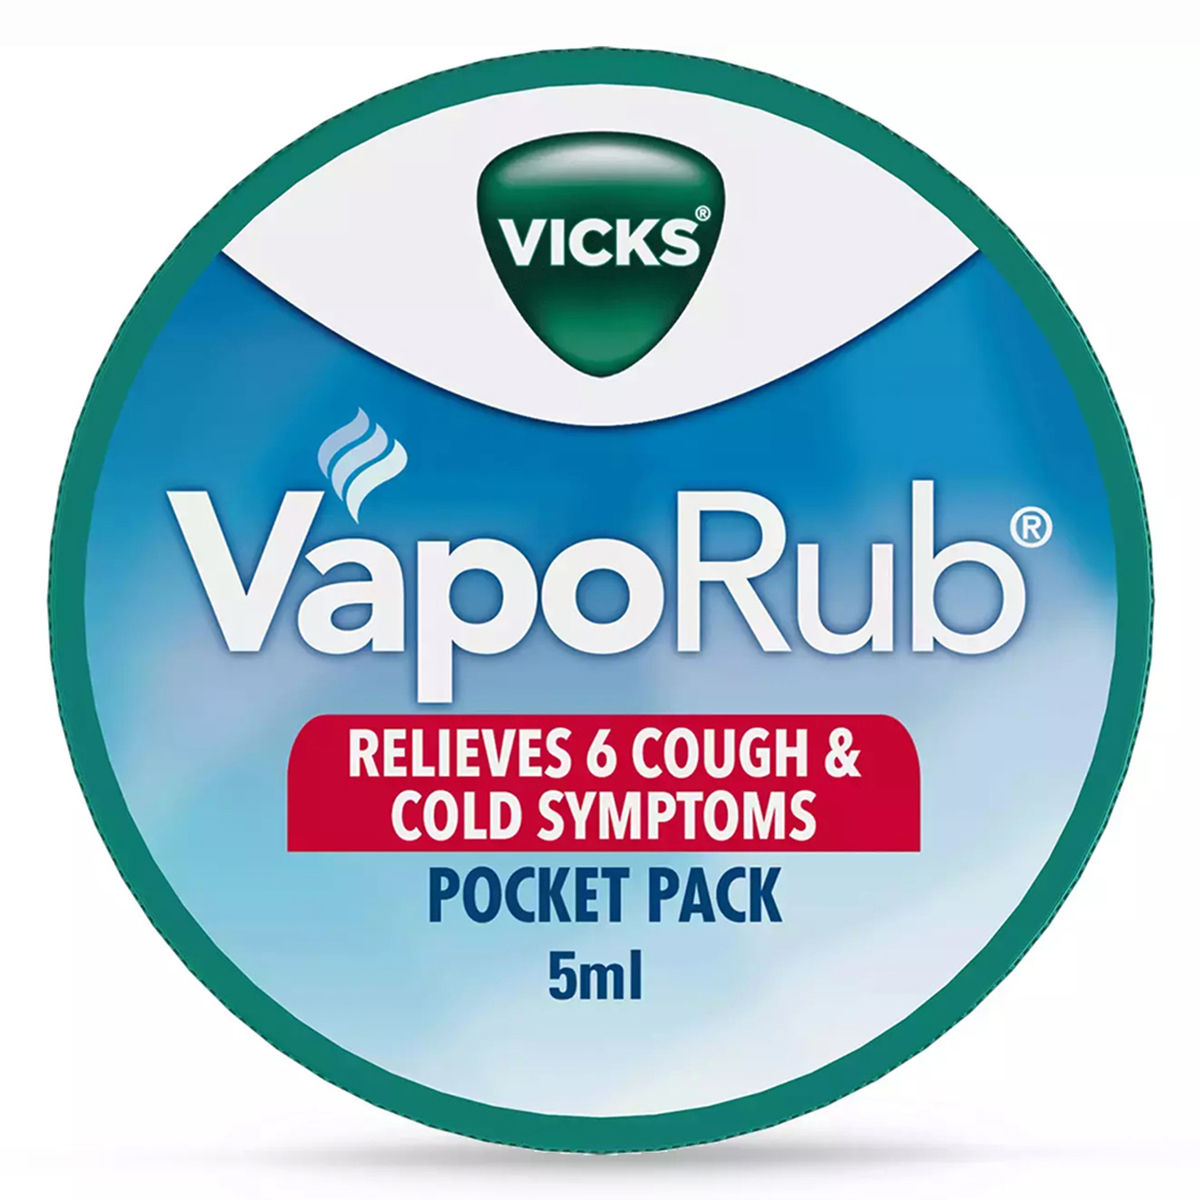 The HOUSE of VICKS